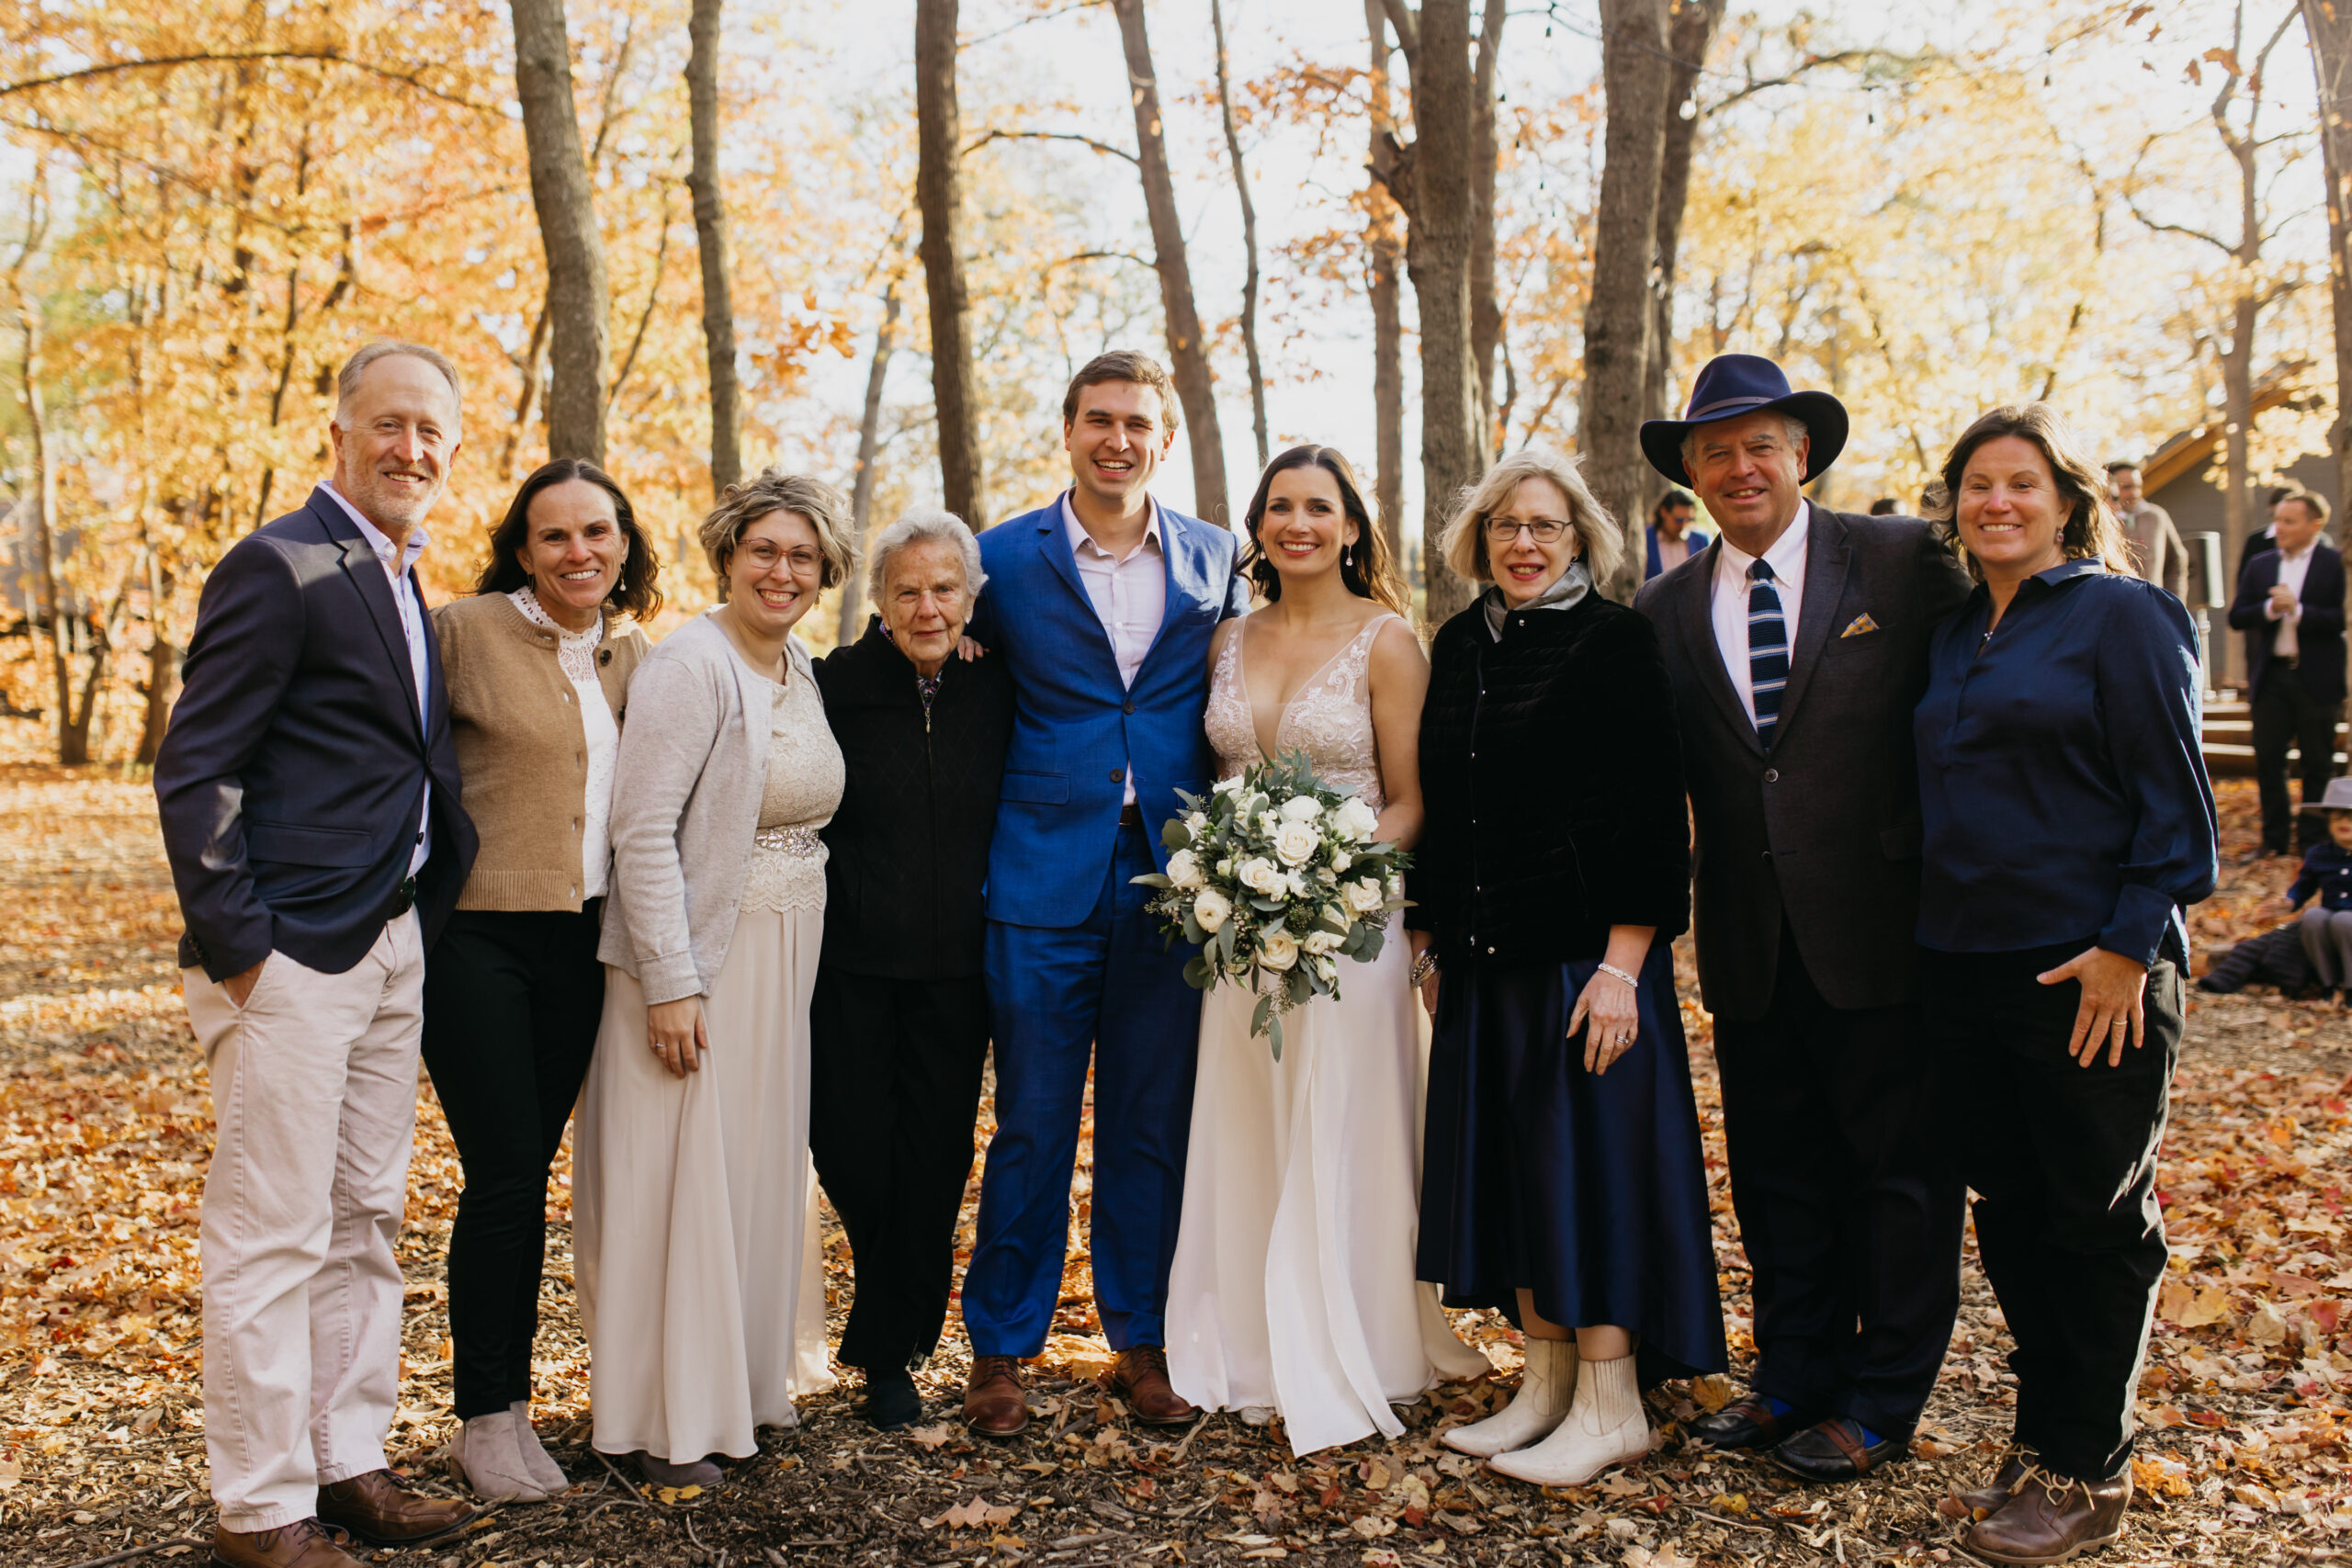 a photo of the bride and groom with their loved ones during their fall wedding